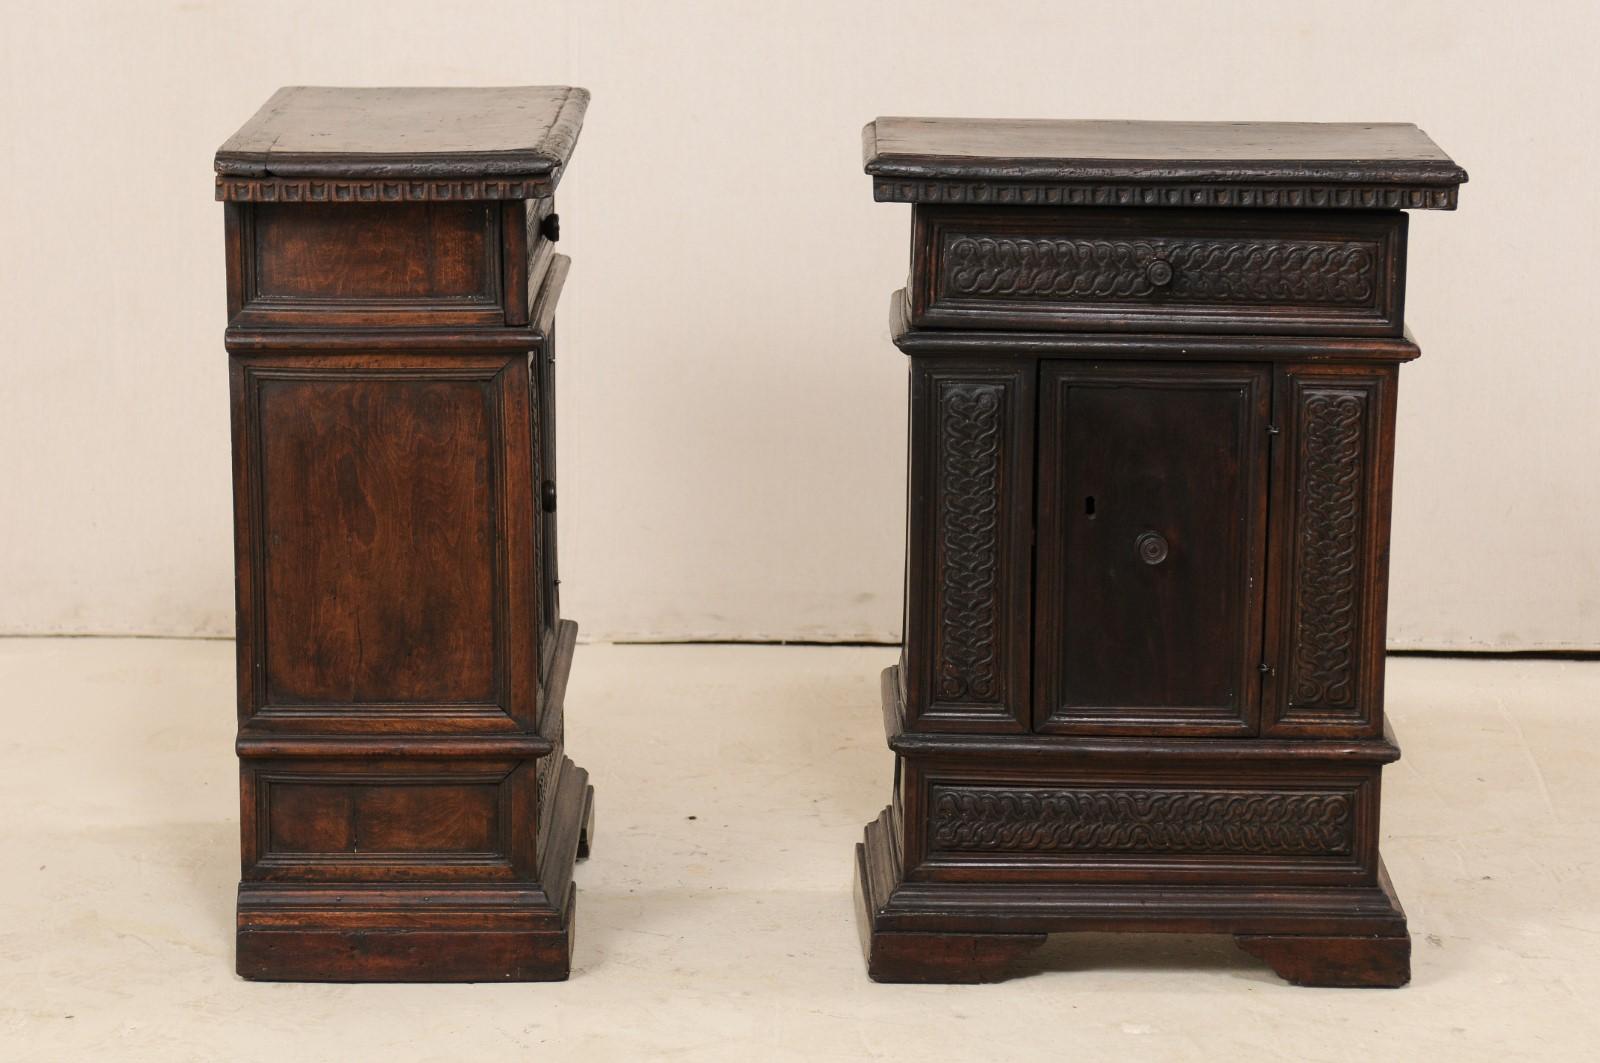 Wood An Italian Pair of Small-Sized 18th C. Carved-Walnut Side Chests or Nightstands